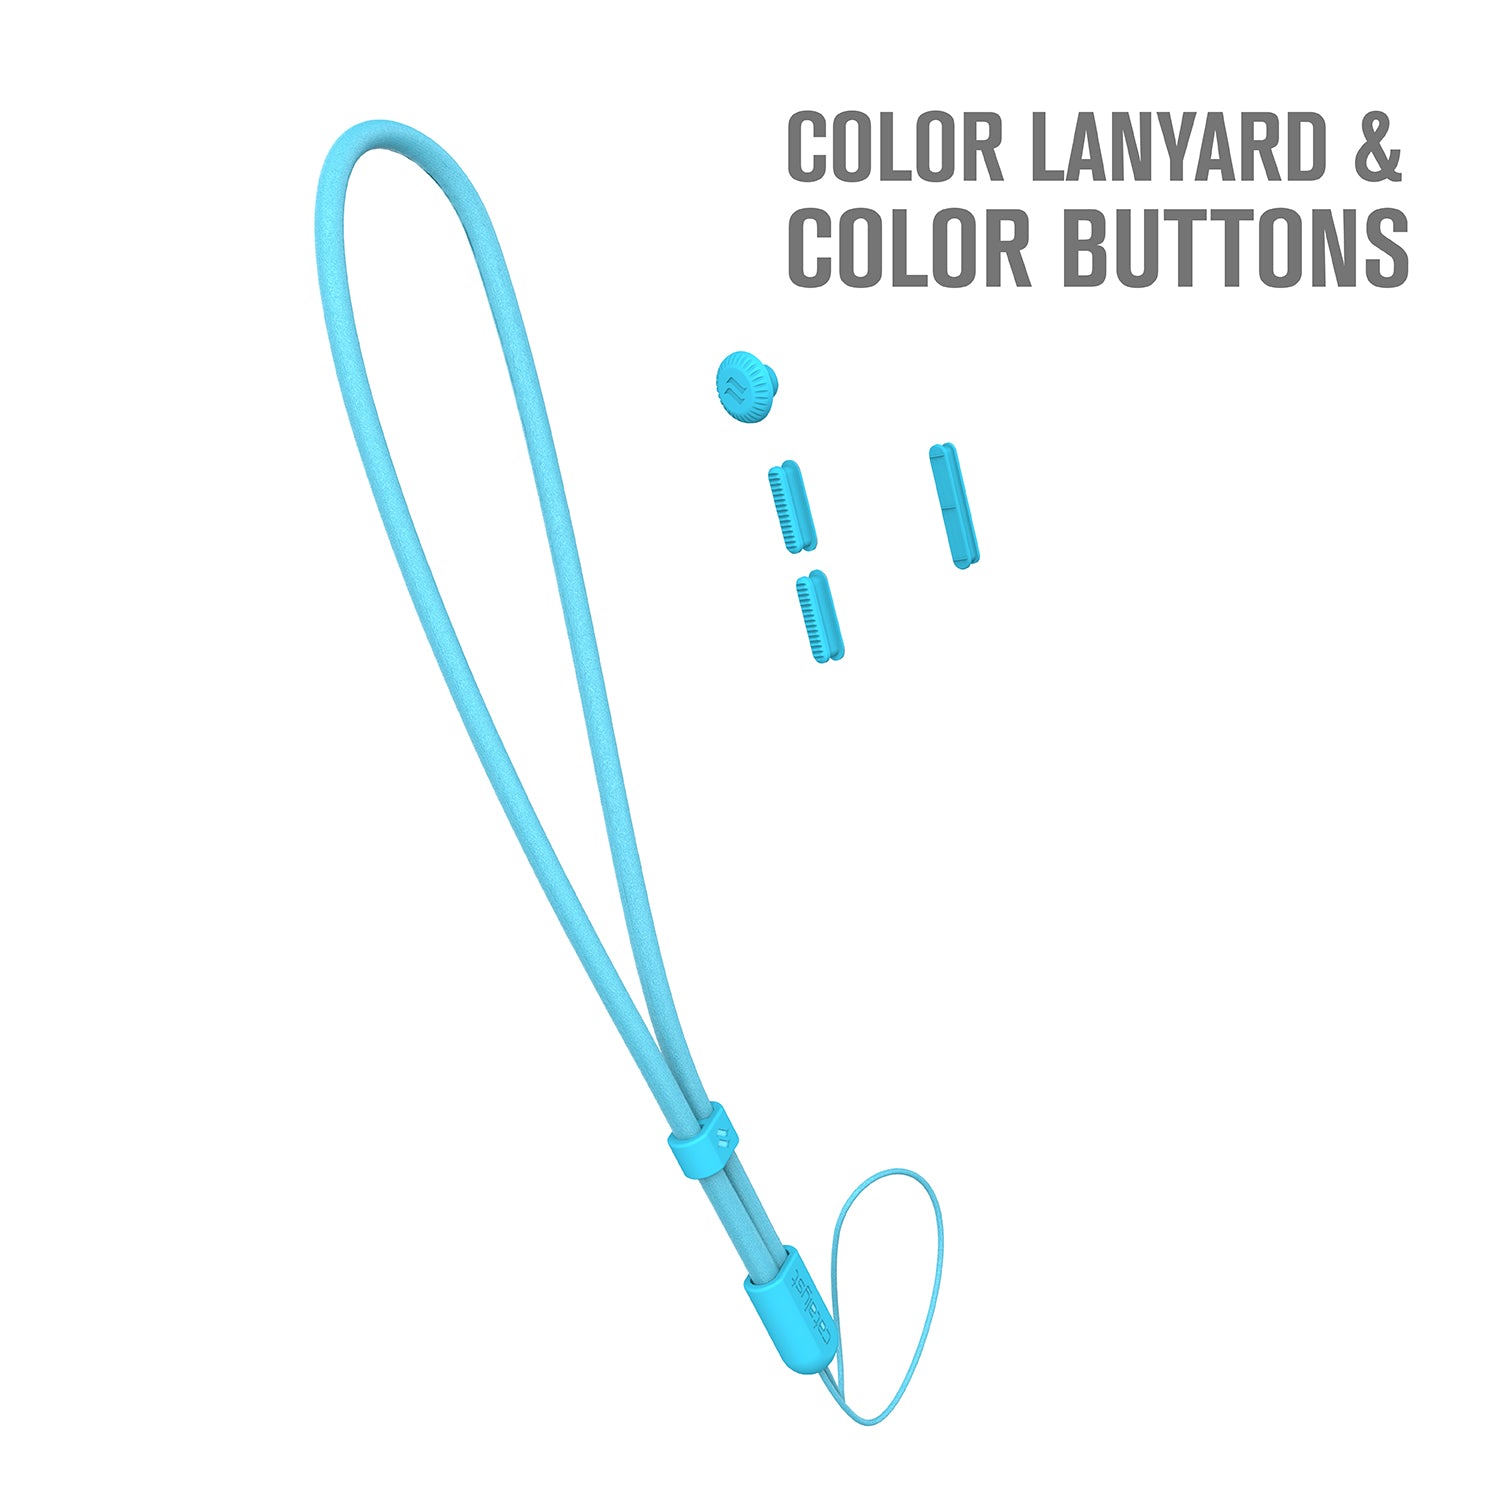 catalyst colored lanyard & buttons products itself bondi blue text reads color lanyard & color buttons